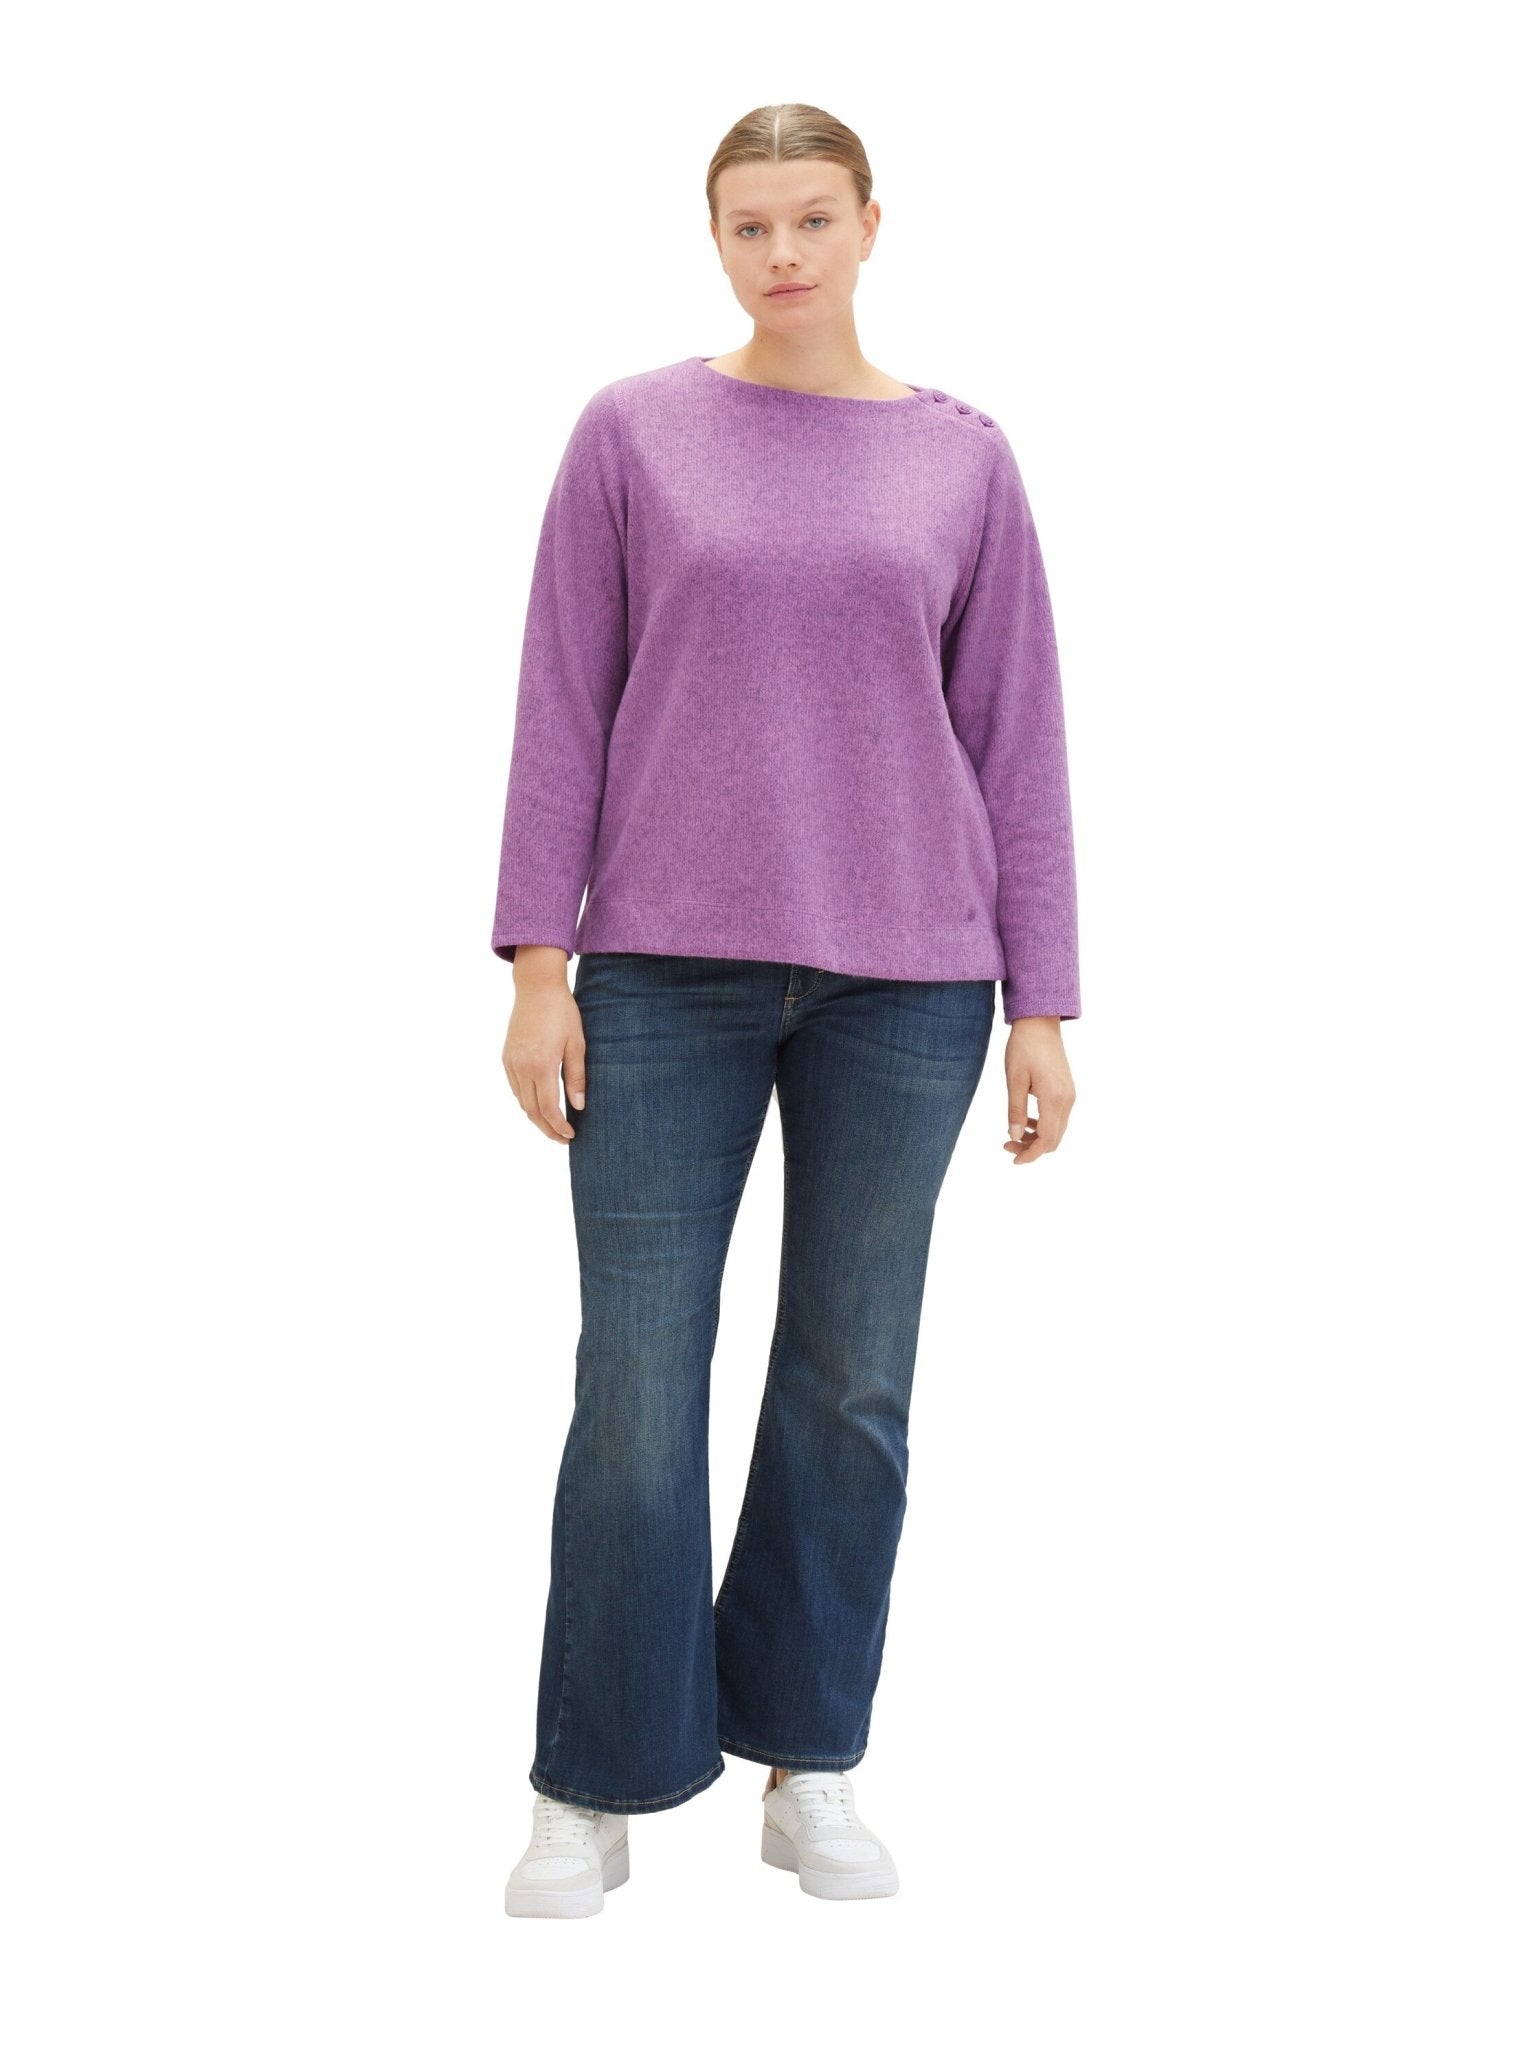 1038842Pullover mit Knopf Detail Tom Tailor lila - Wildflowers44Lila